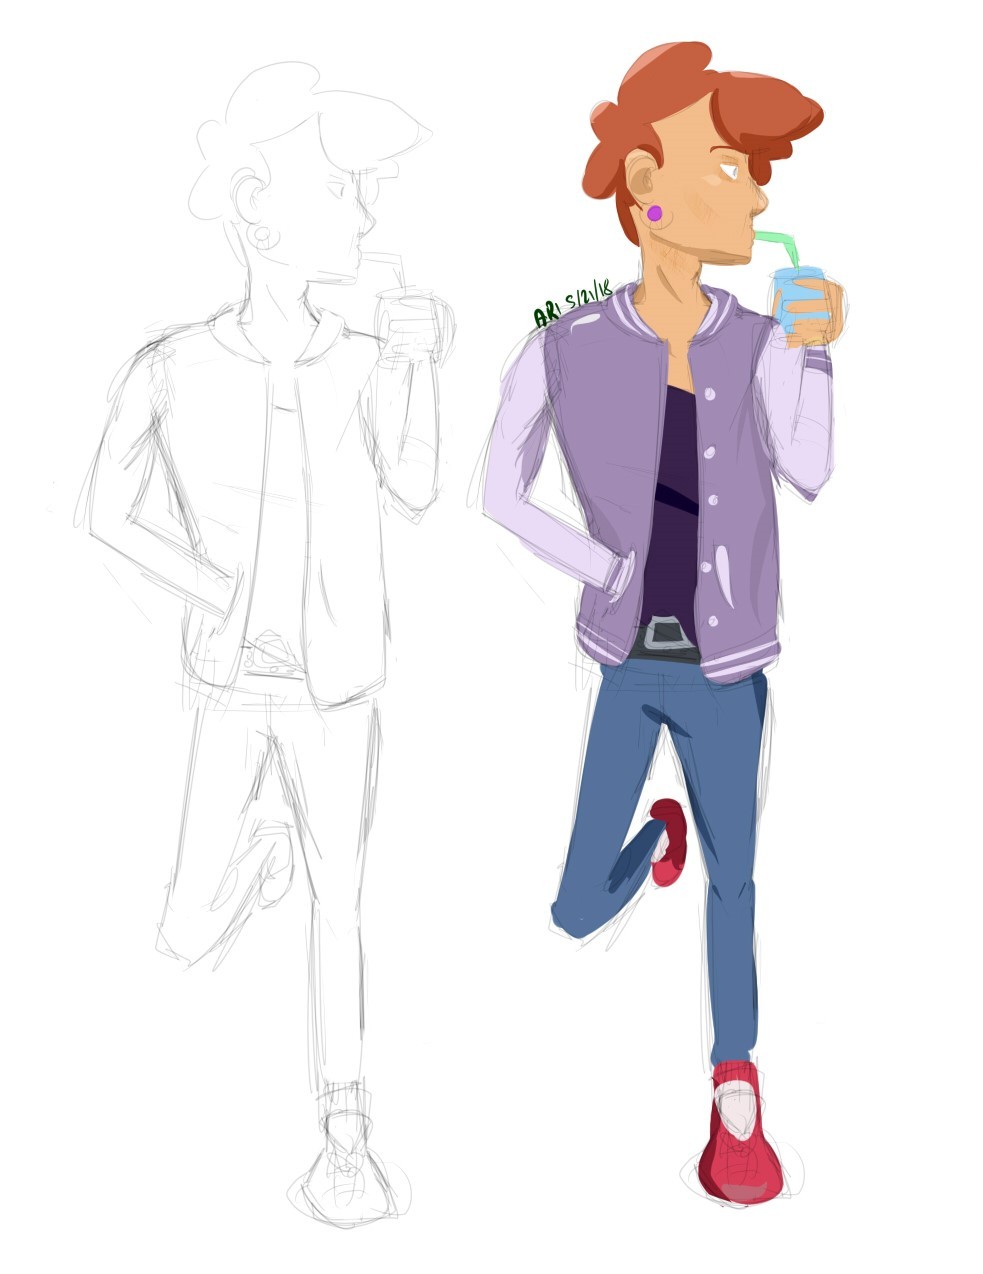 Had a need to draw Lars in a varsity jacket so I made the jacket Big Donut colors ᕕ( ᐛ )ᕗ